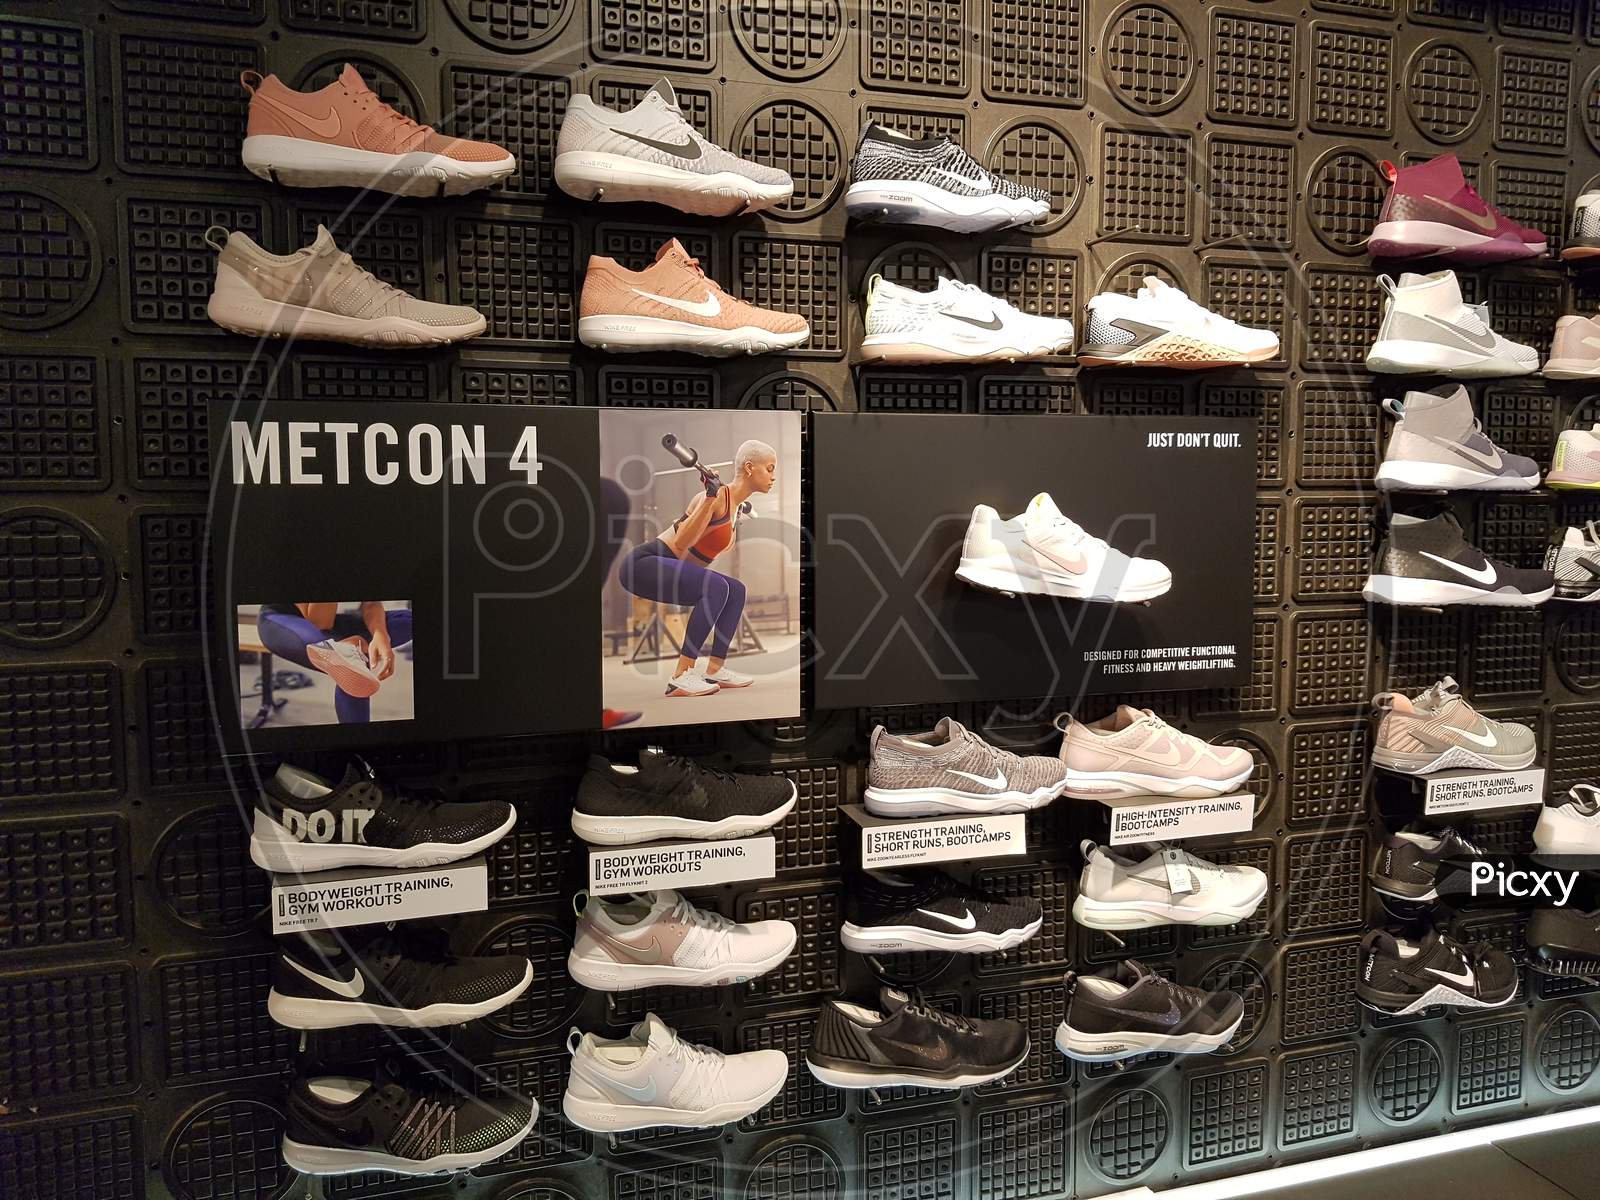 Display Shoes in a Store